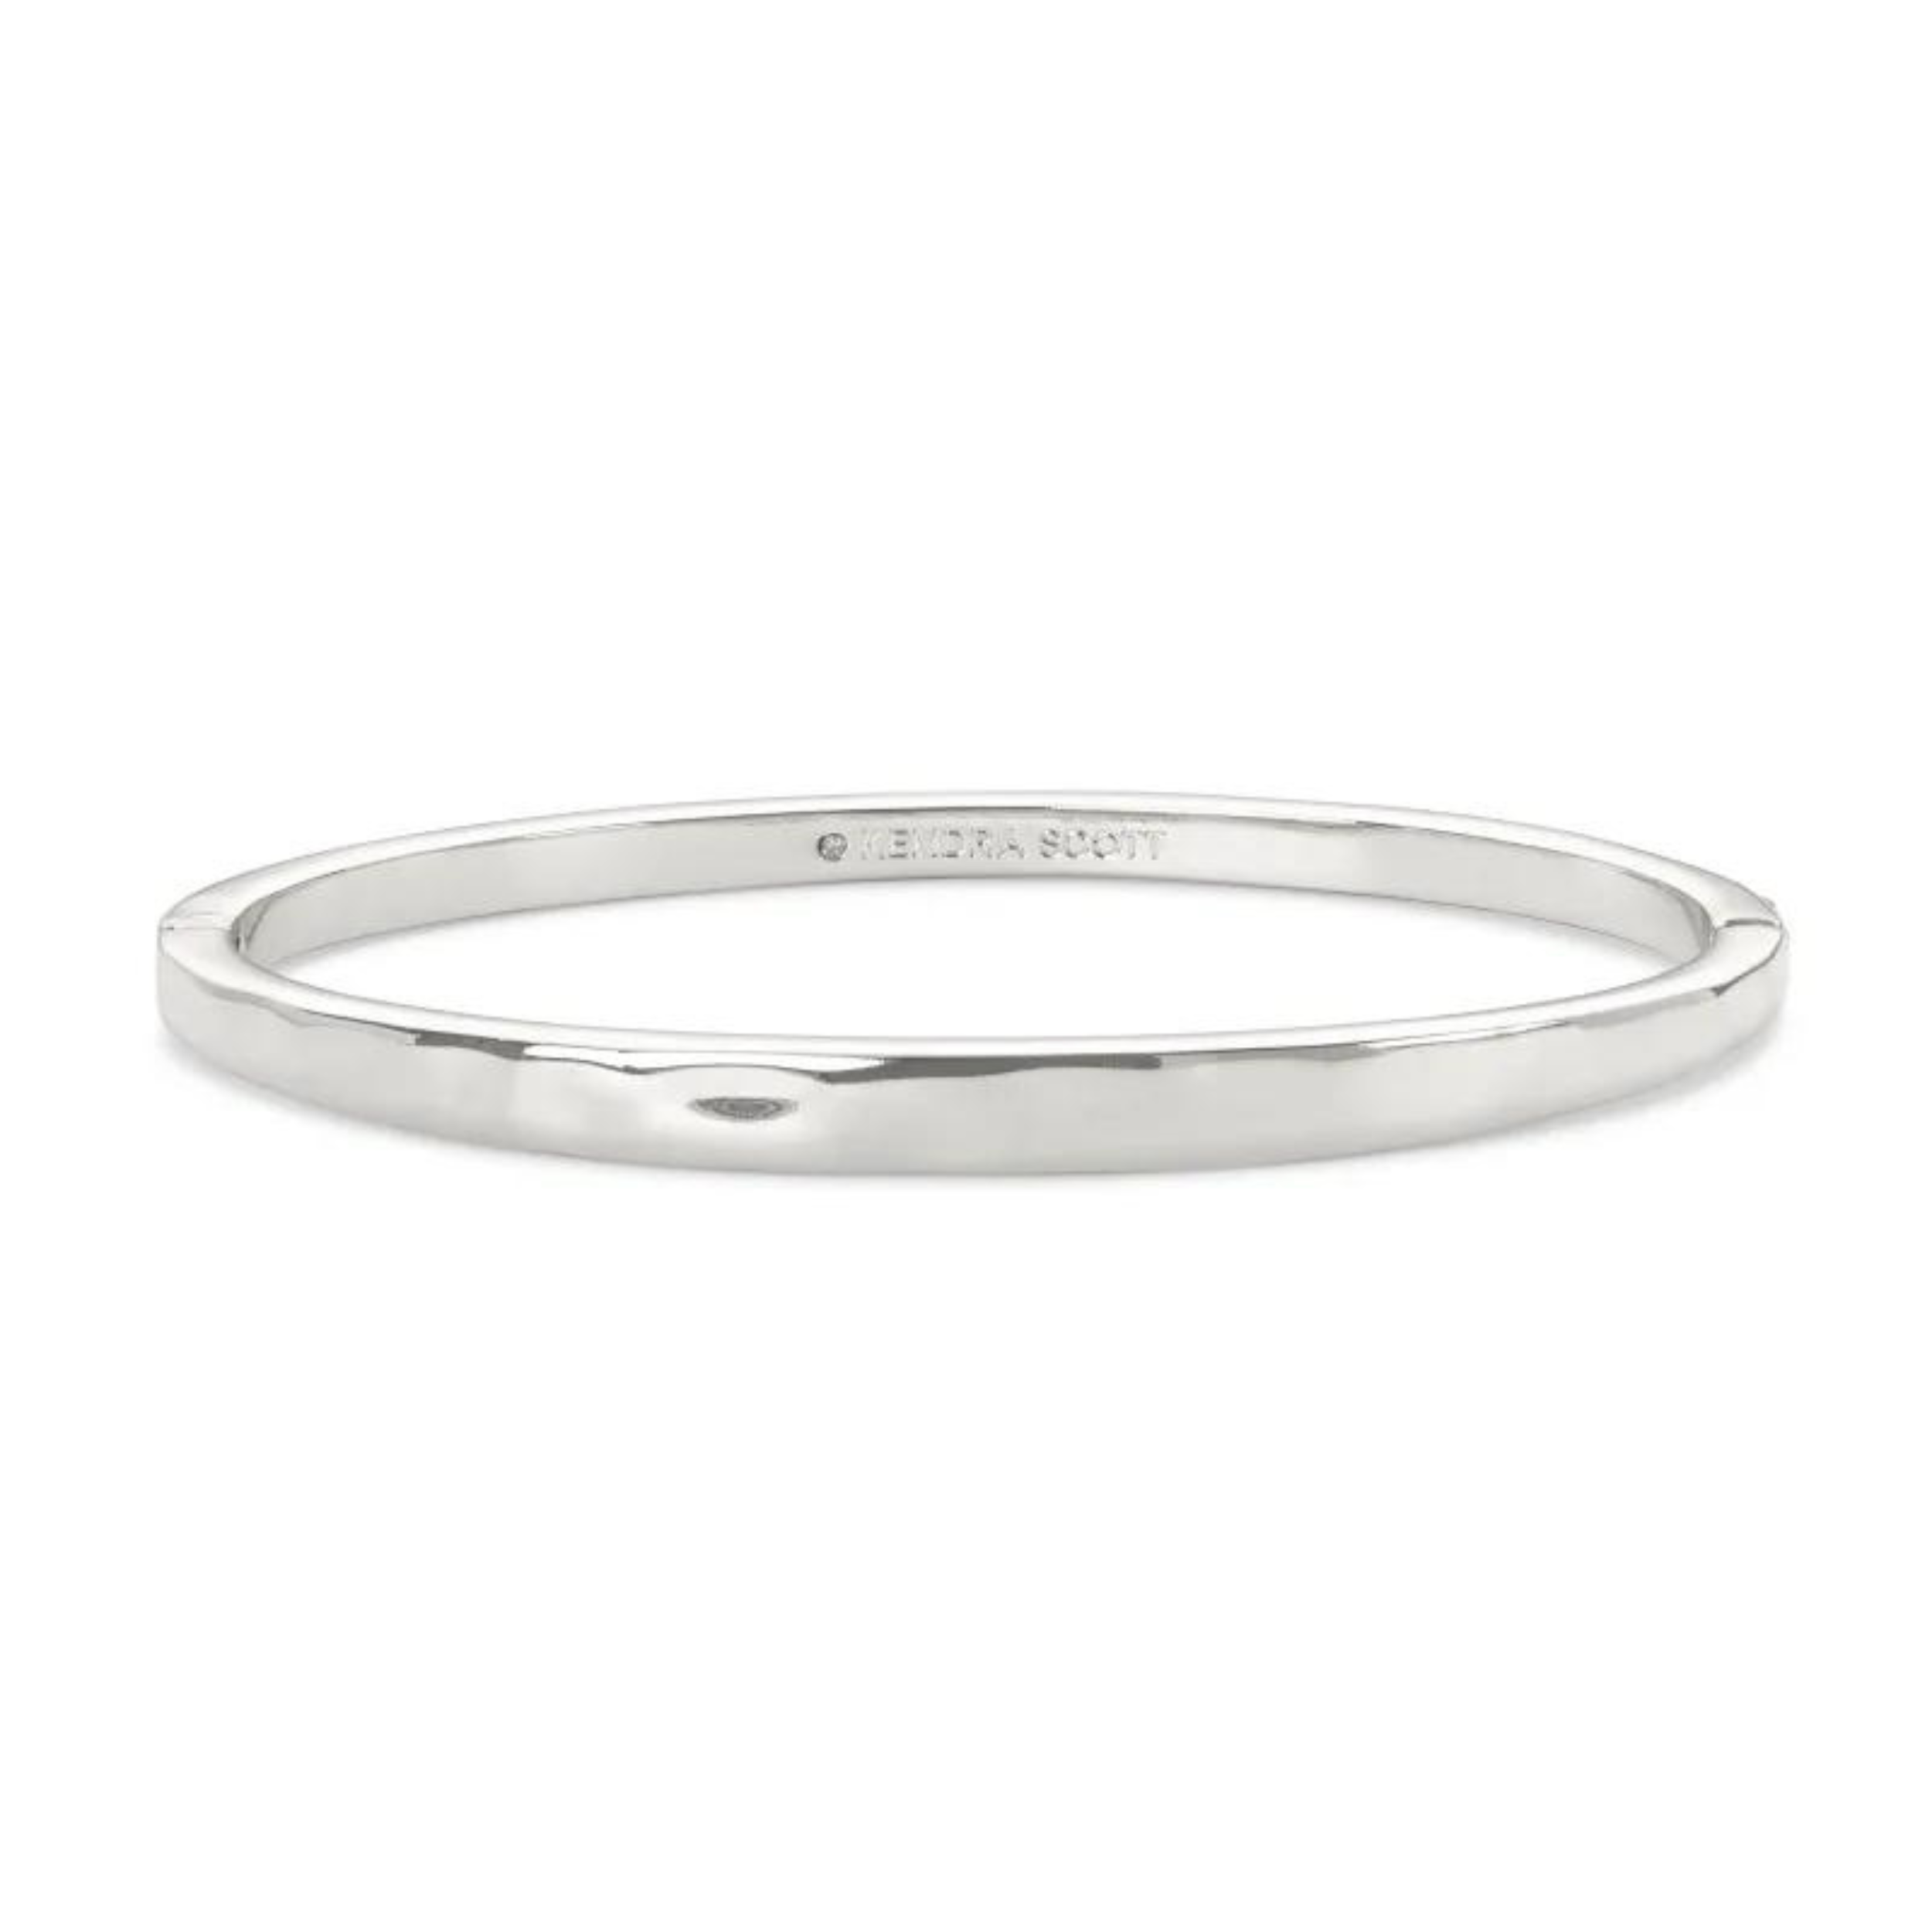 Silver bangle bracelet, pictured on a white background.